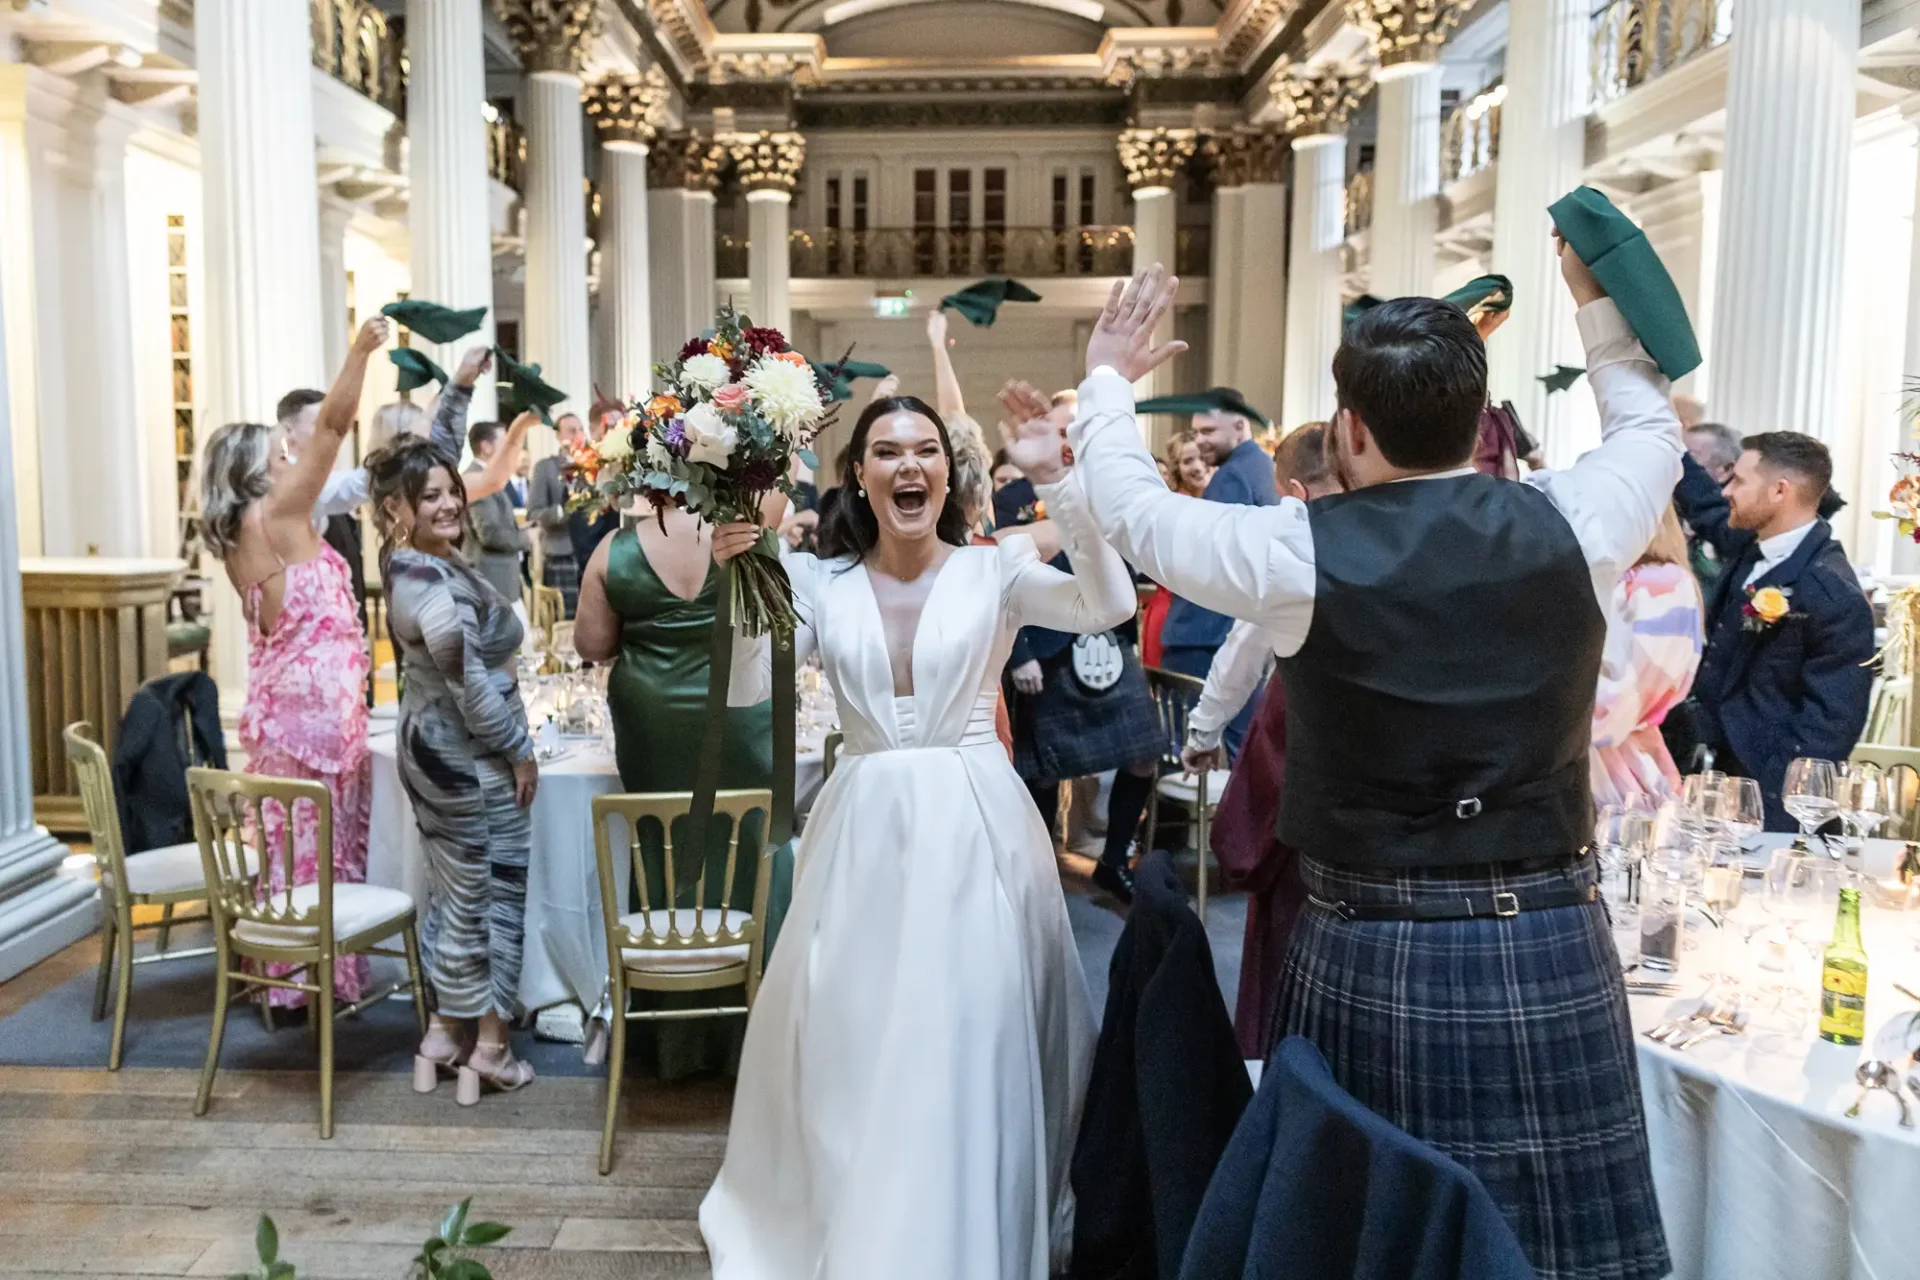 Bride and groom joyfully entering a grand dining hall, greeted with applause by guests, bride in white, groom in kilt.